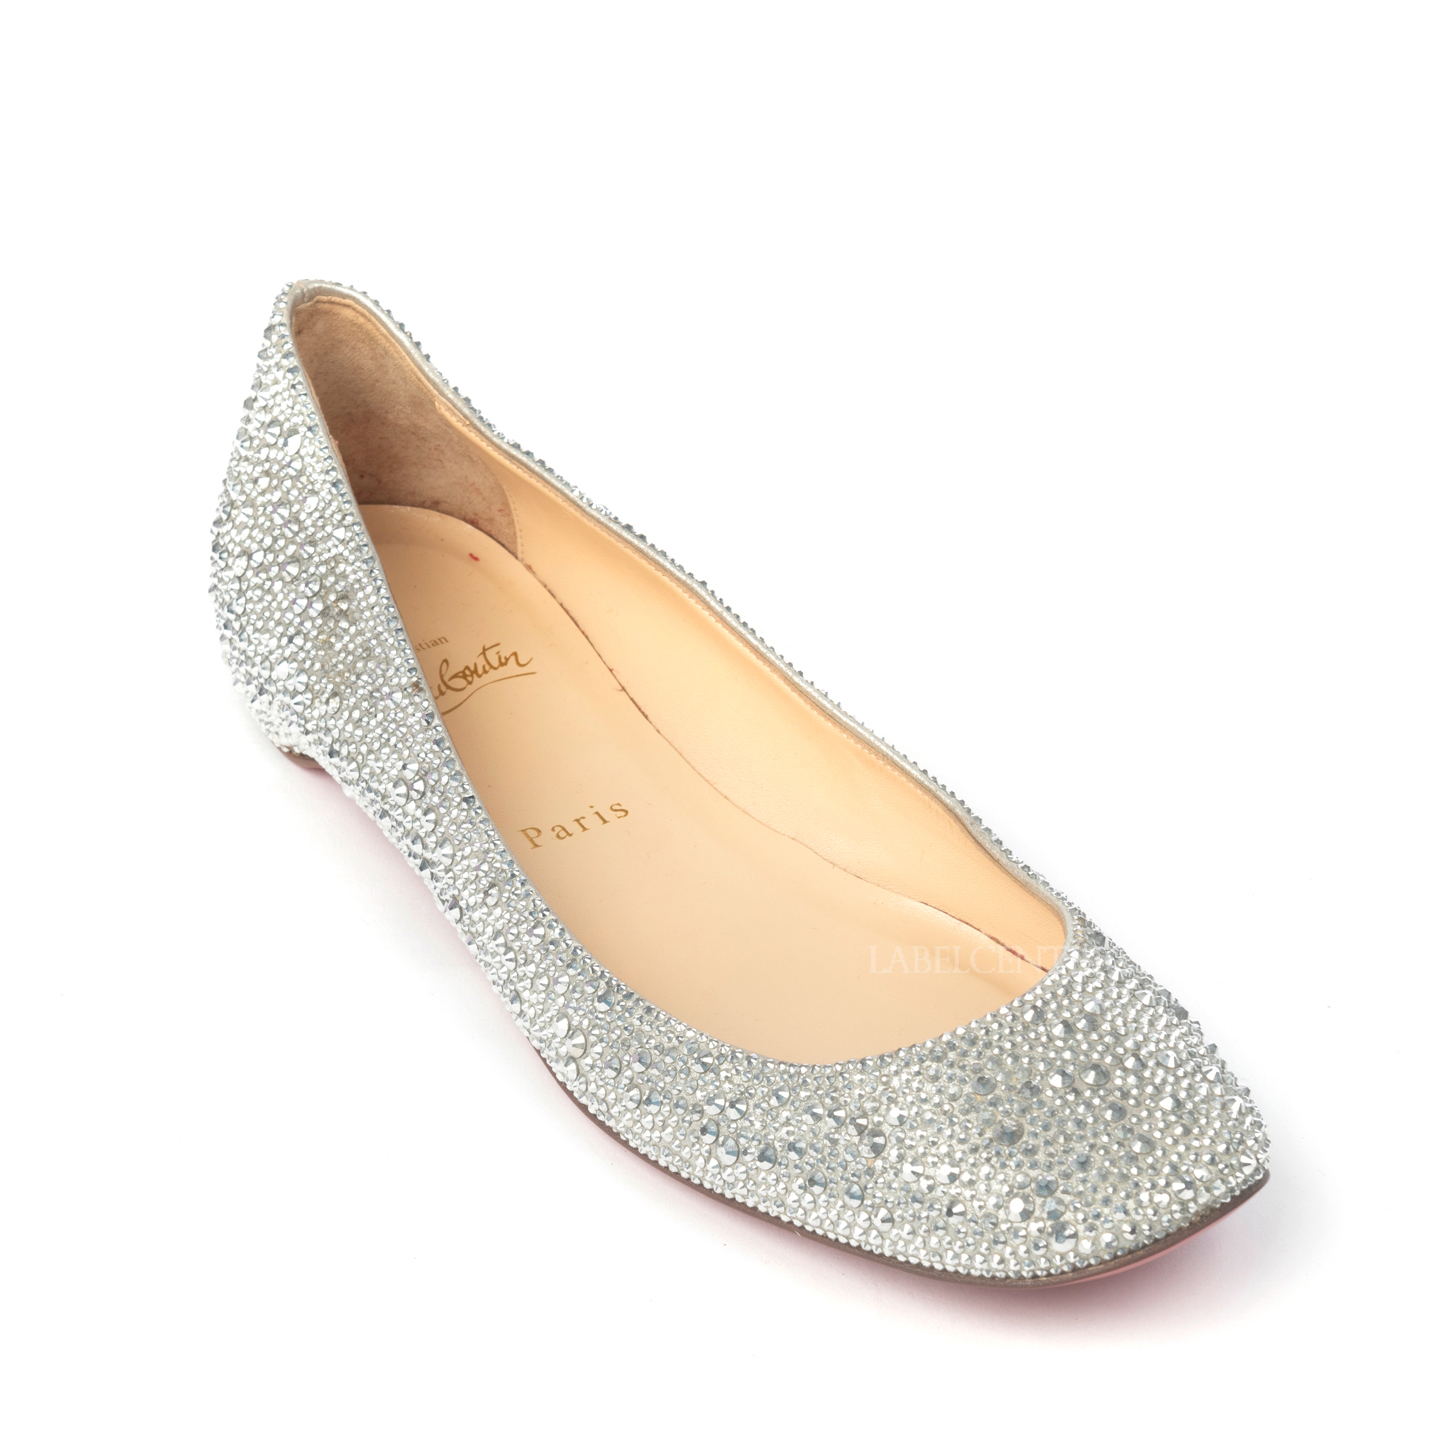 Christian Louboutin Gozul Strass Crystal Encrusted Ballet Flats, Size 39 LabelCentric